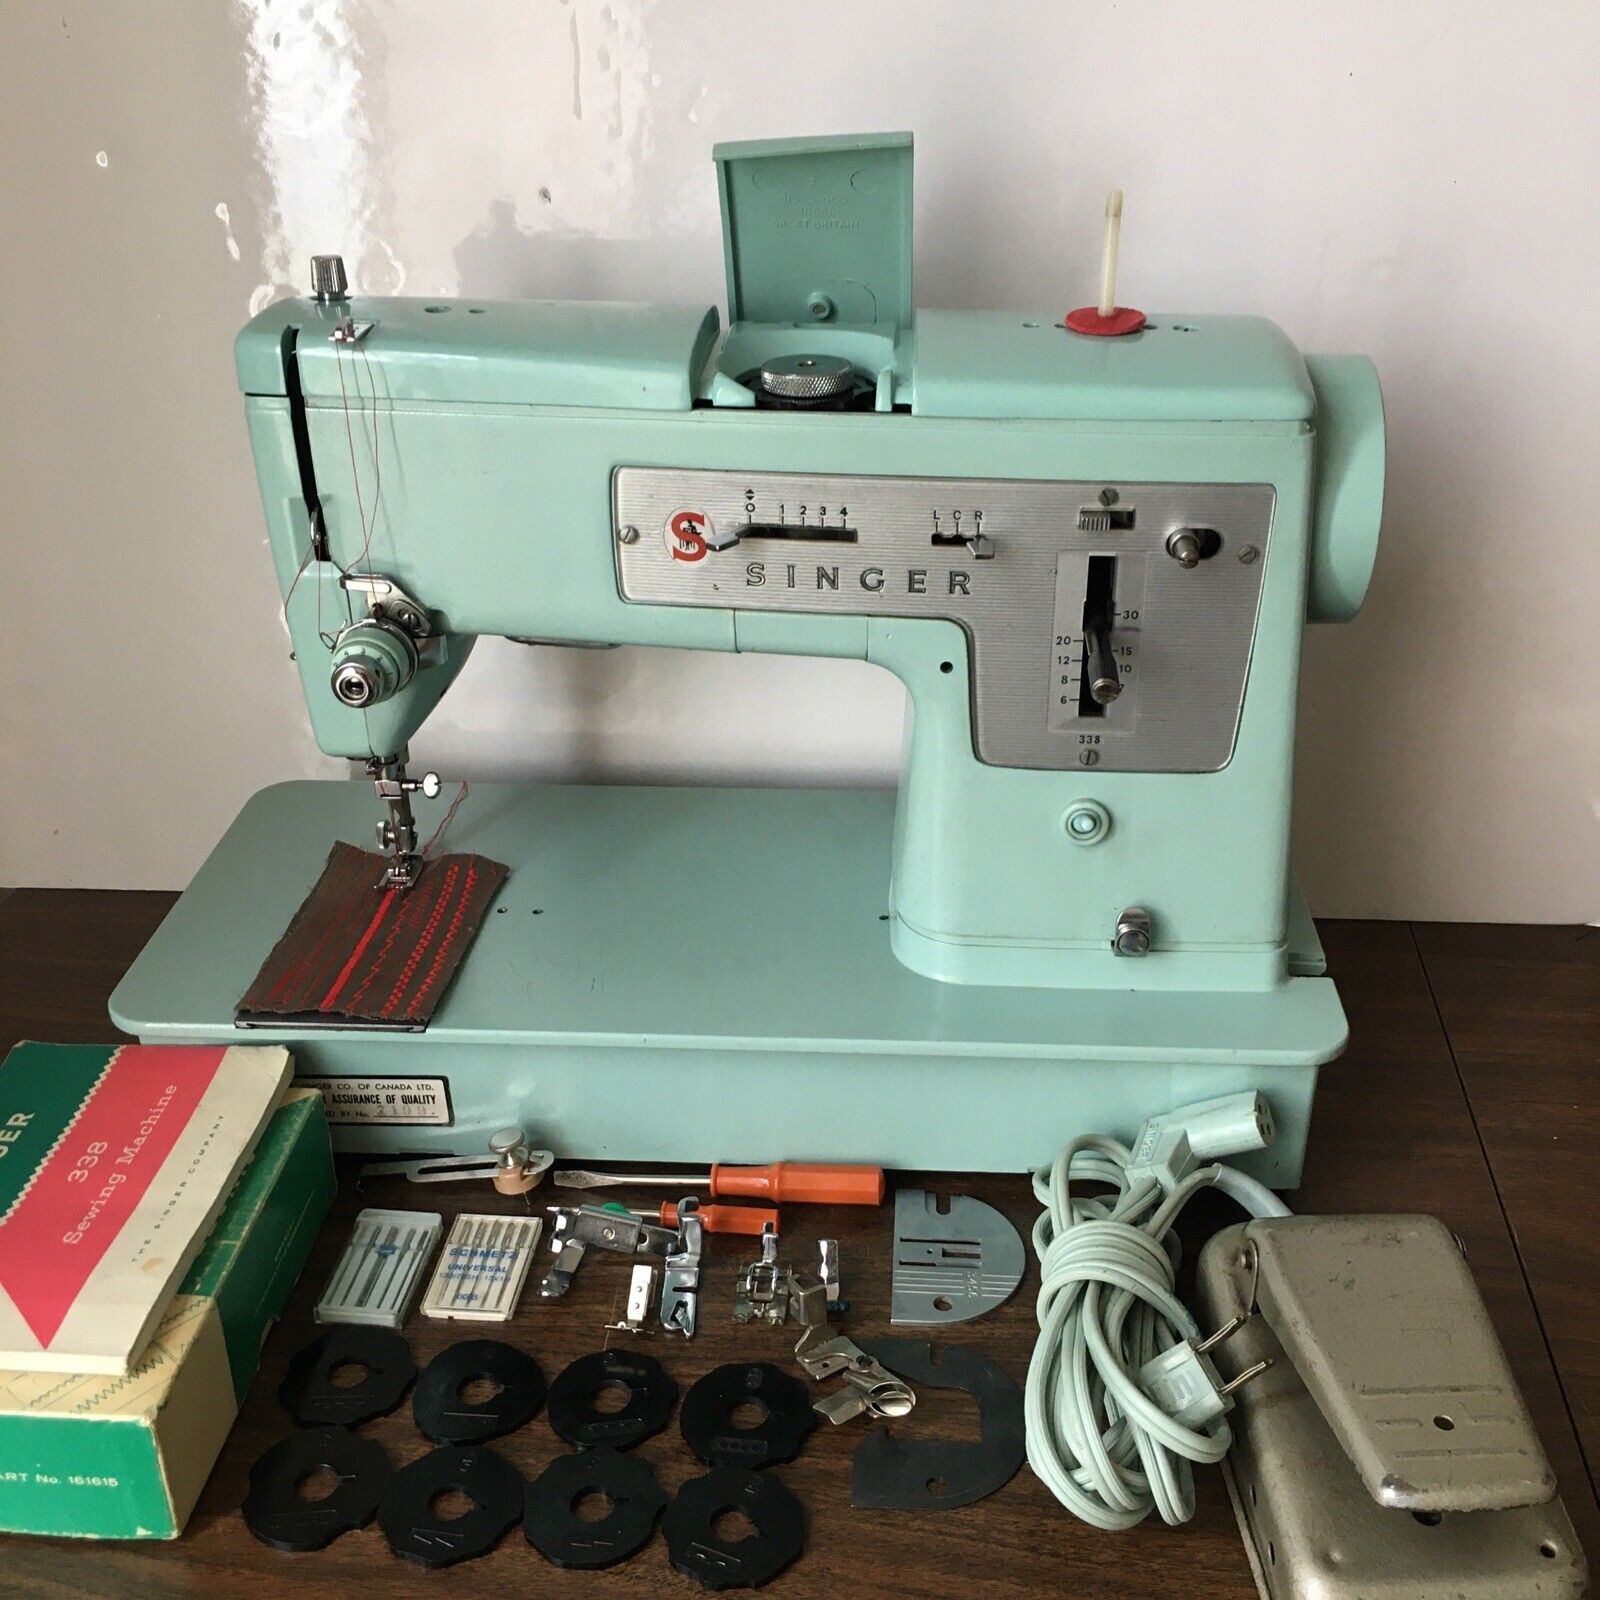 RARE SINGER 338 Sewing Machine Blue With Attachments, Cams, Sew A+ (Case Read)